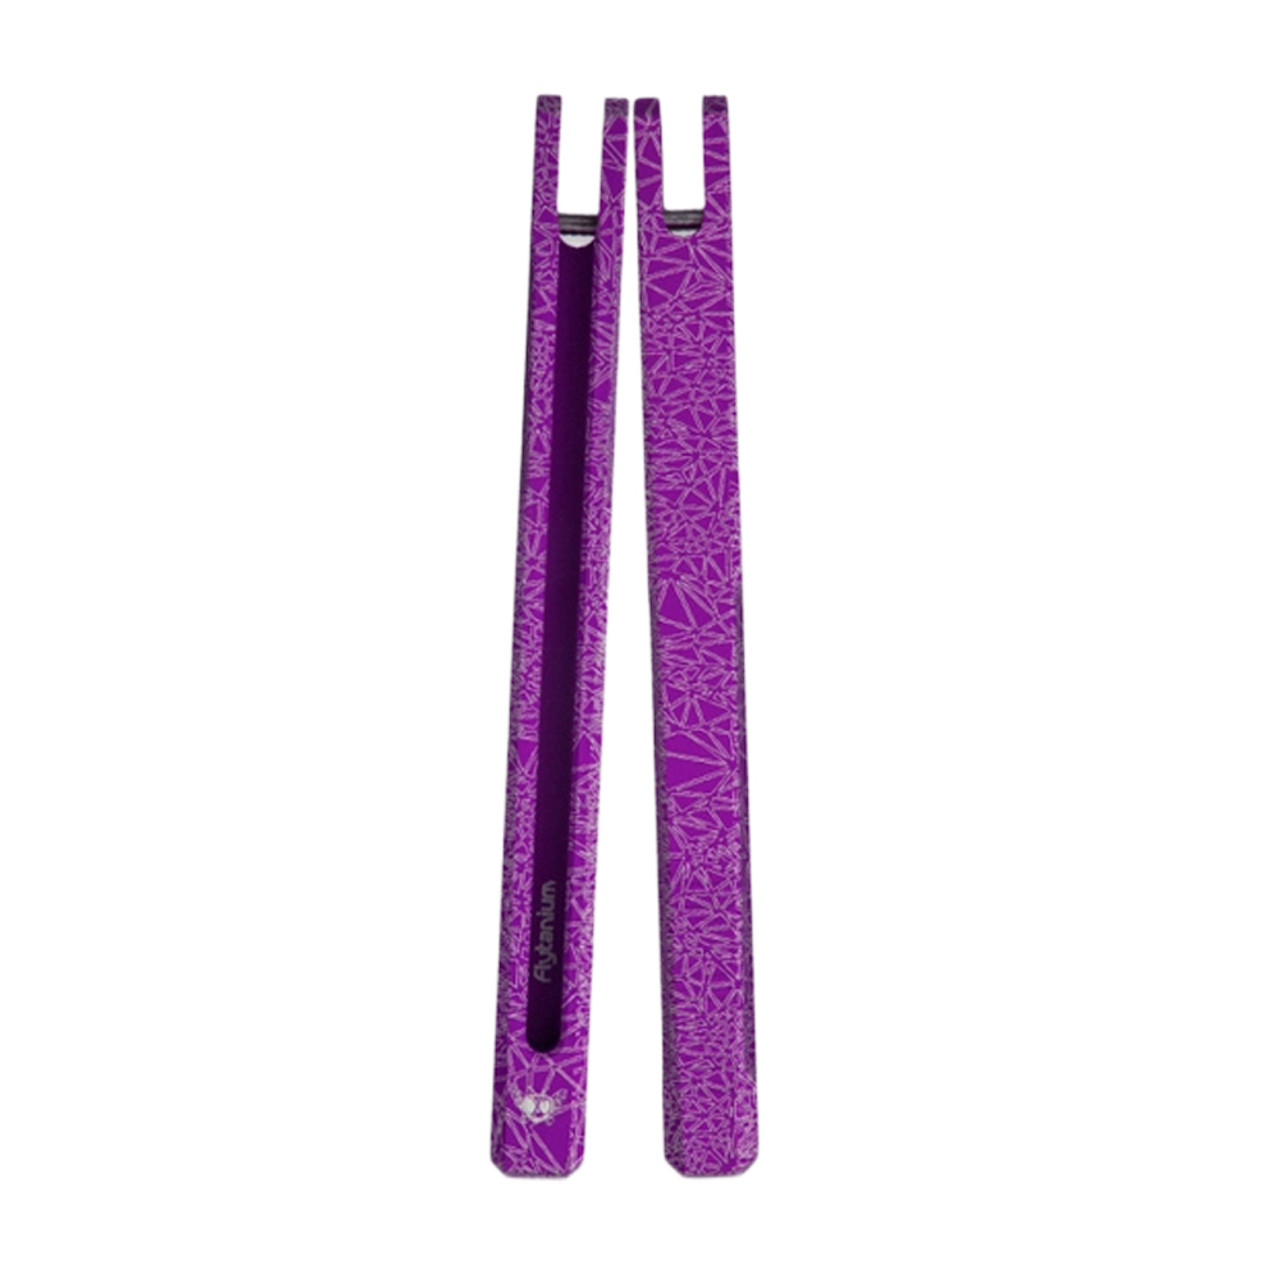 Flytanium Limited Edition "Shatter" Handles (Purple) - Kershaw Lucha Balisong